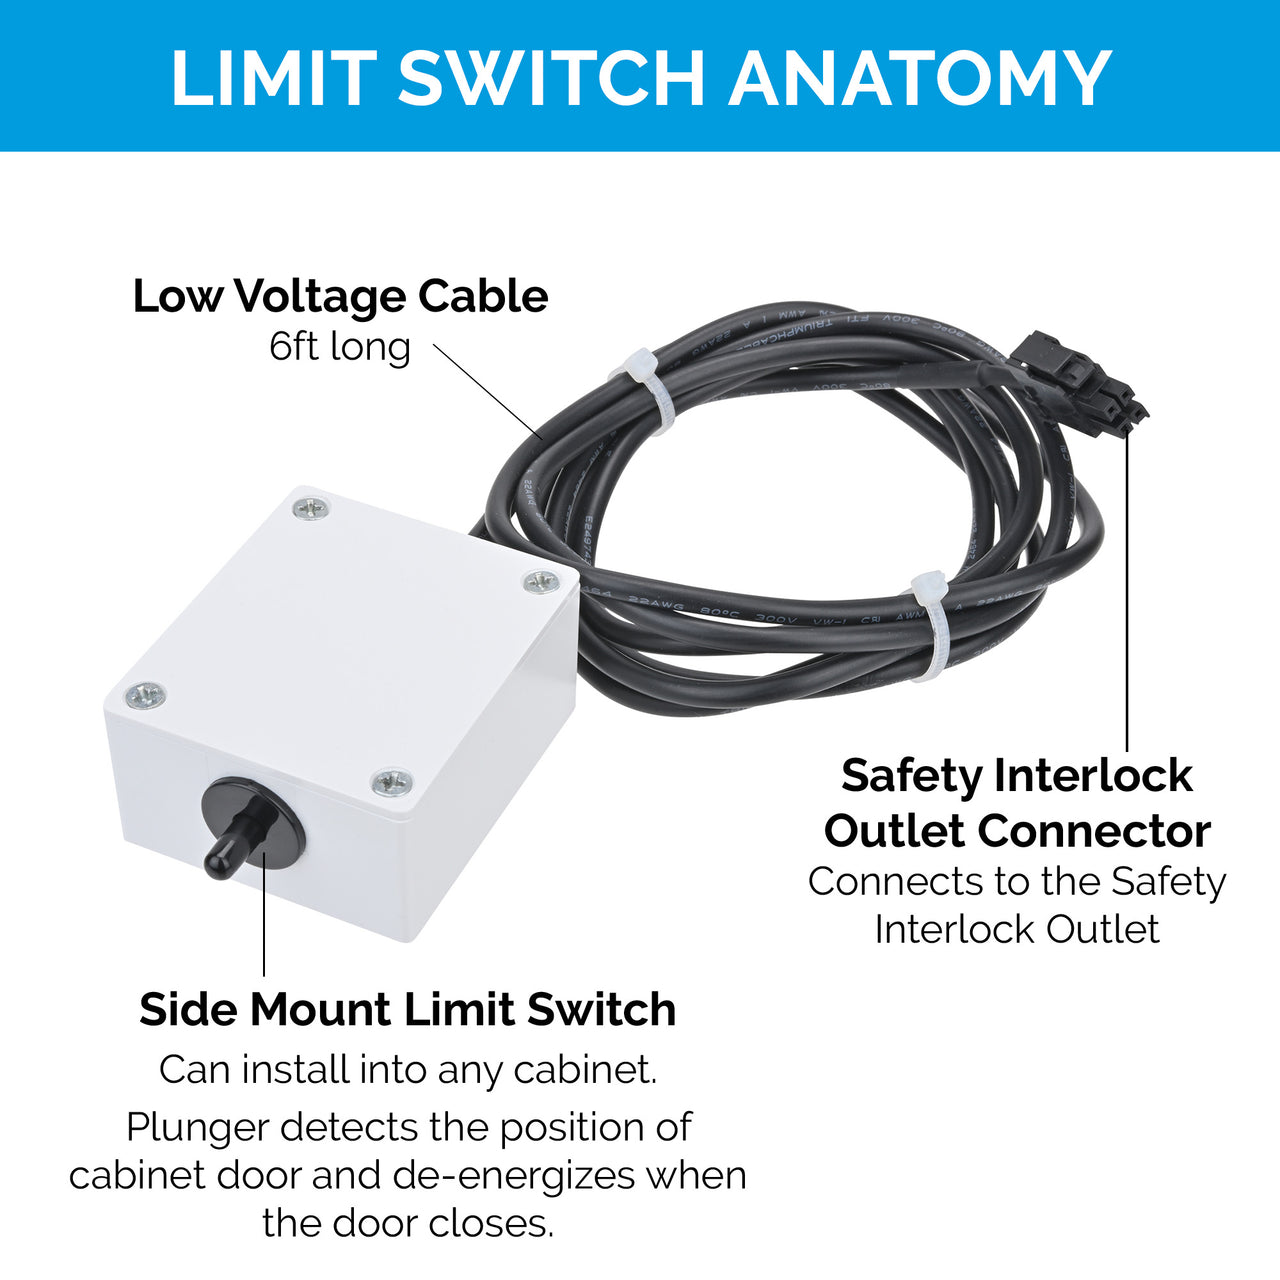 General Purpose Limit Switch with Side Mount Limit Switch